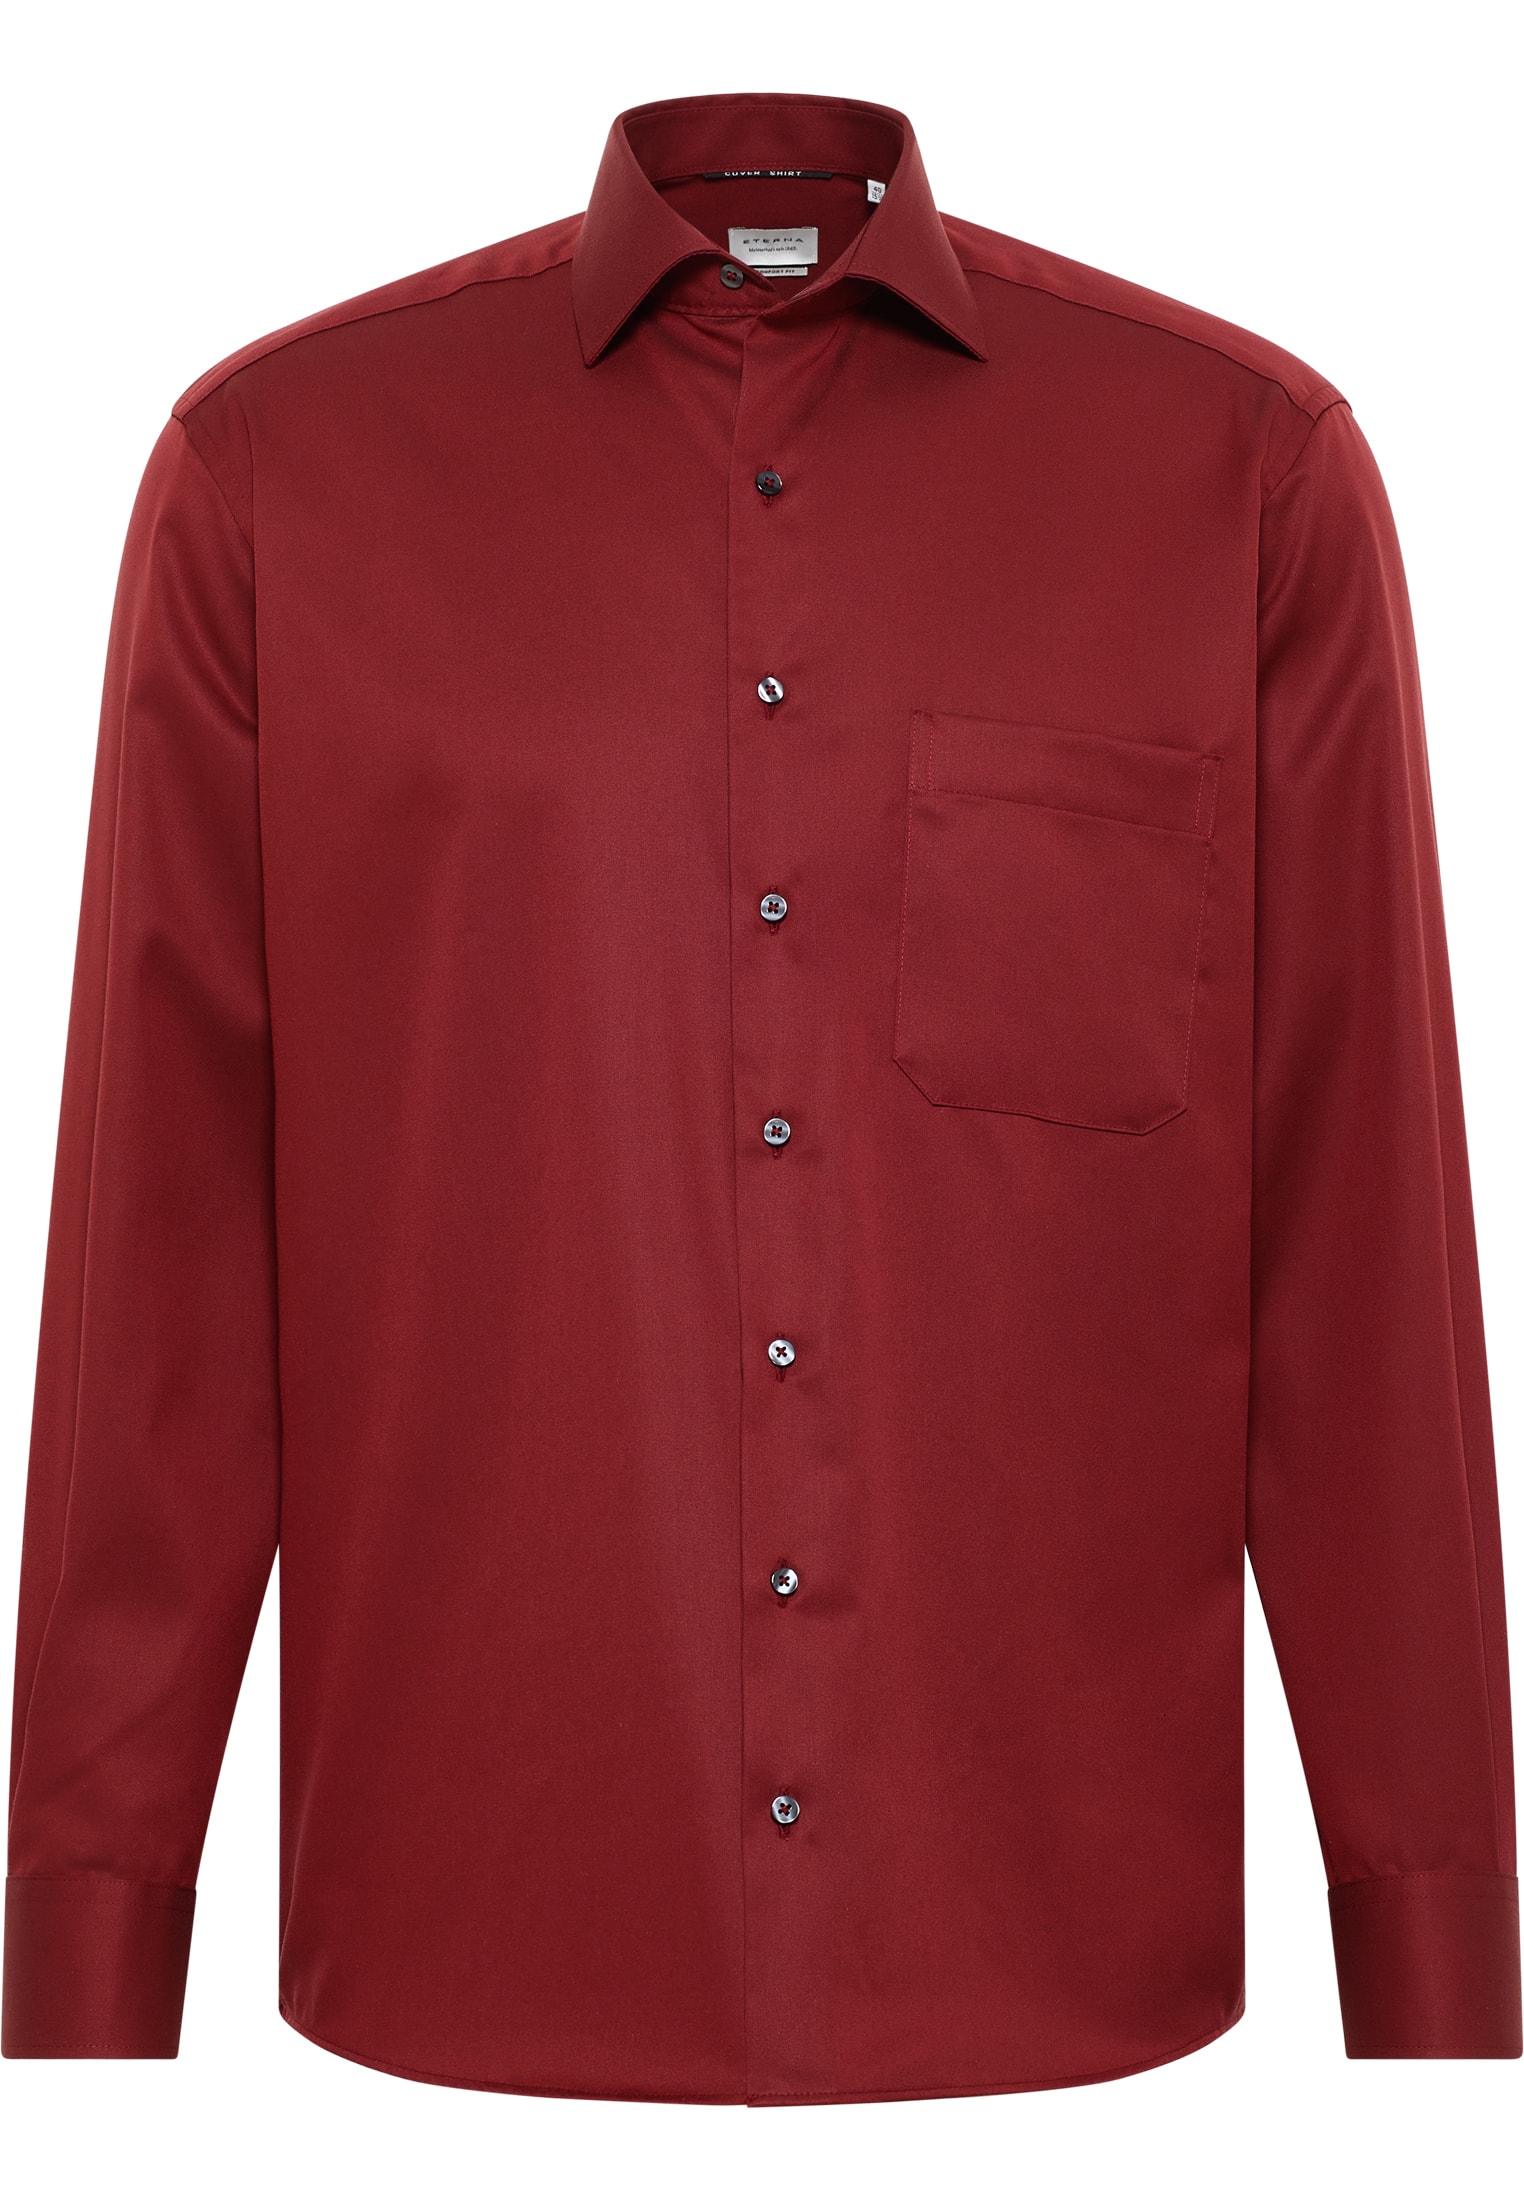 COMFORT FIT Cover Shirt in donkerrood vlakte